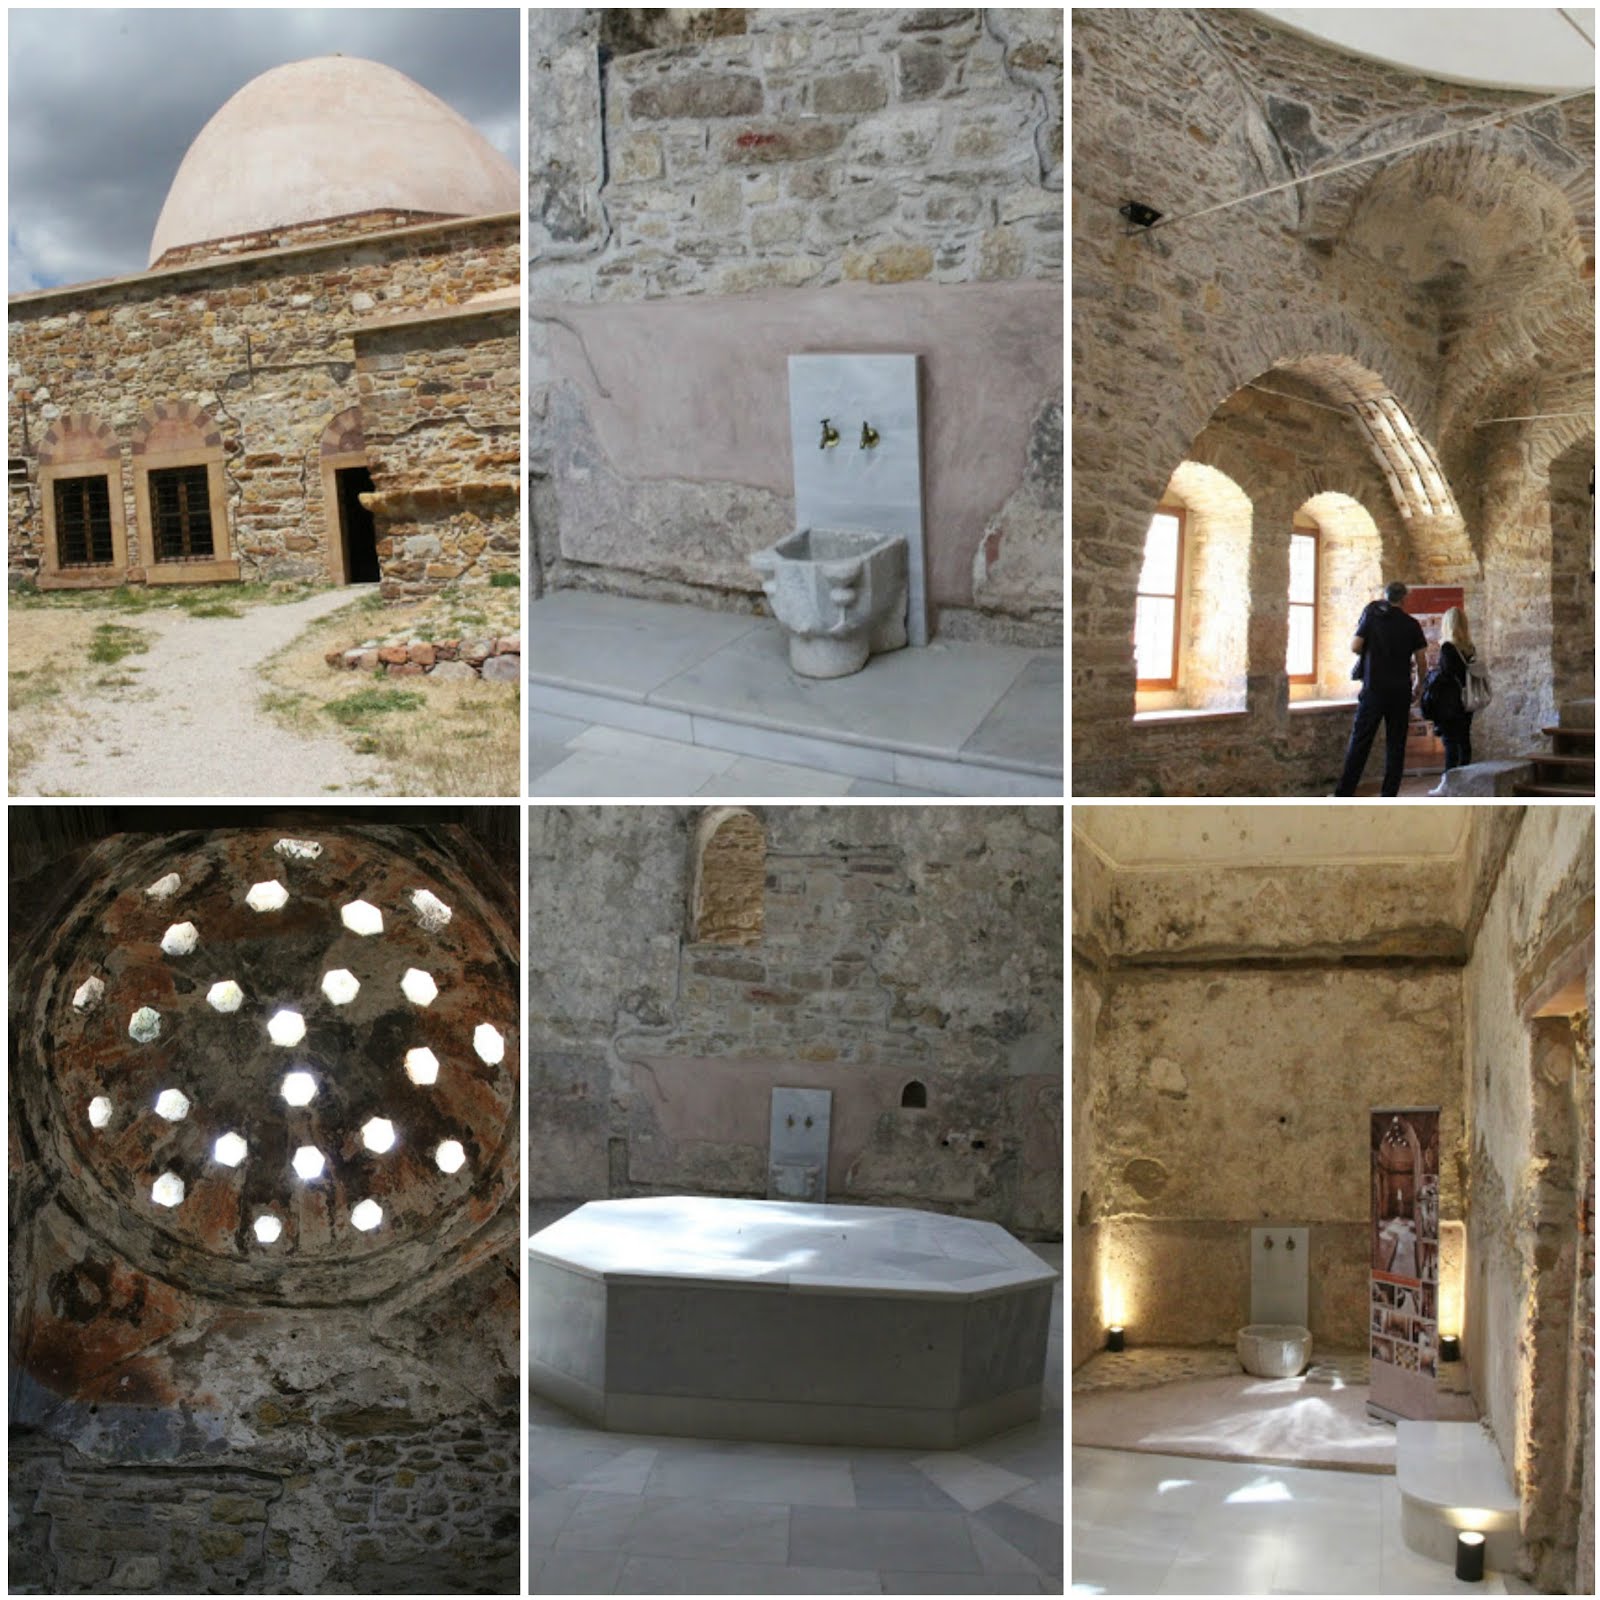 The Ottoman baths in the Castle of Chios :